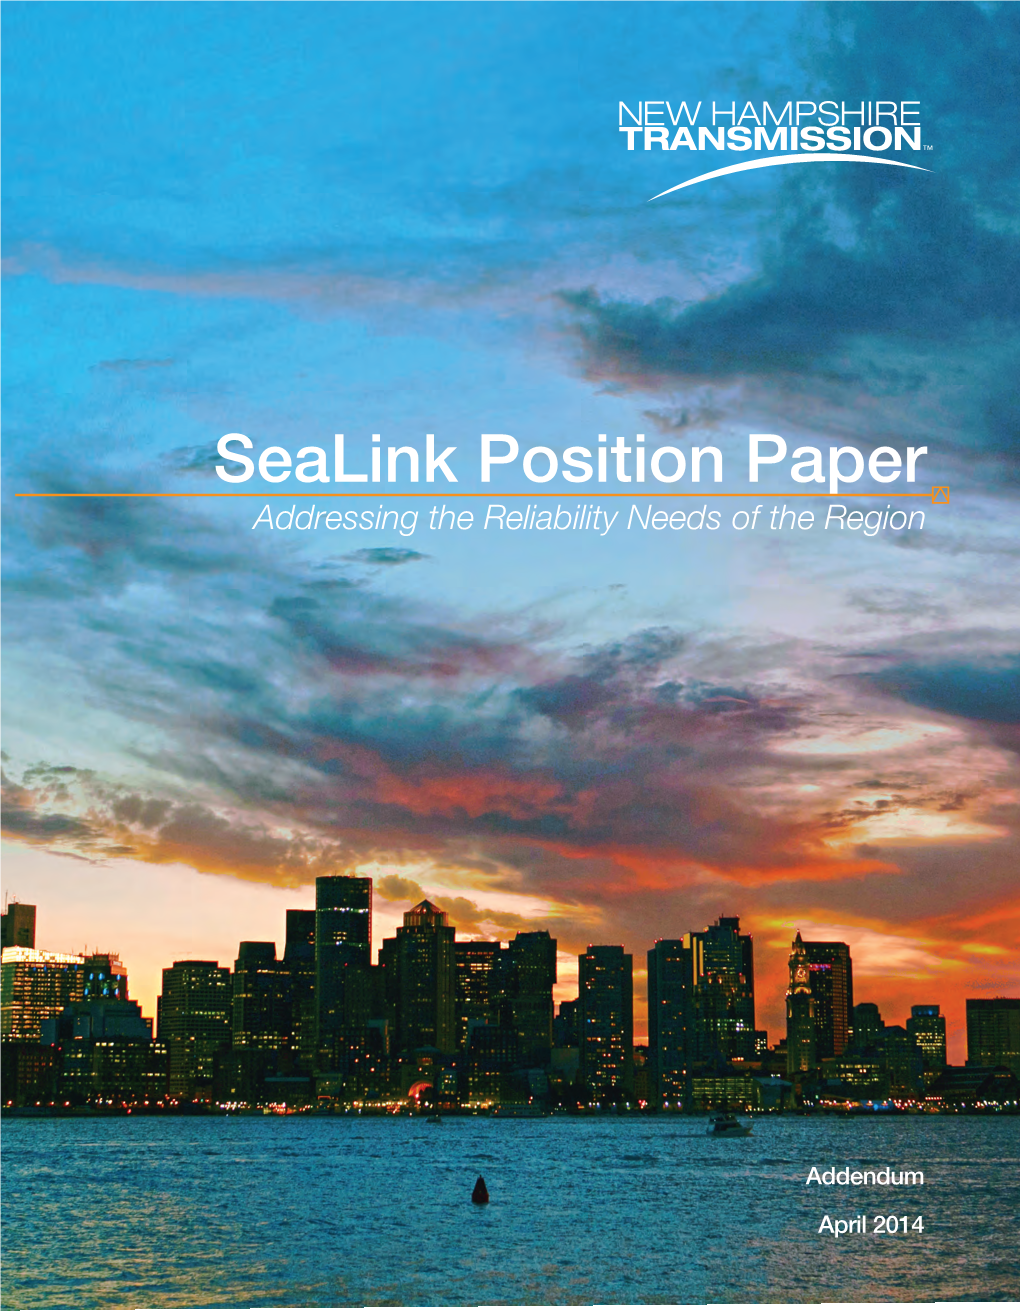 Sealink Position Paper Addressing the Reliability Needs of the Region